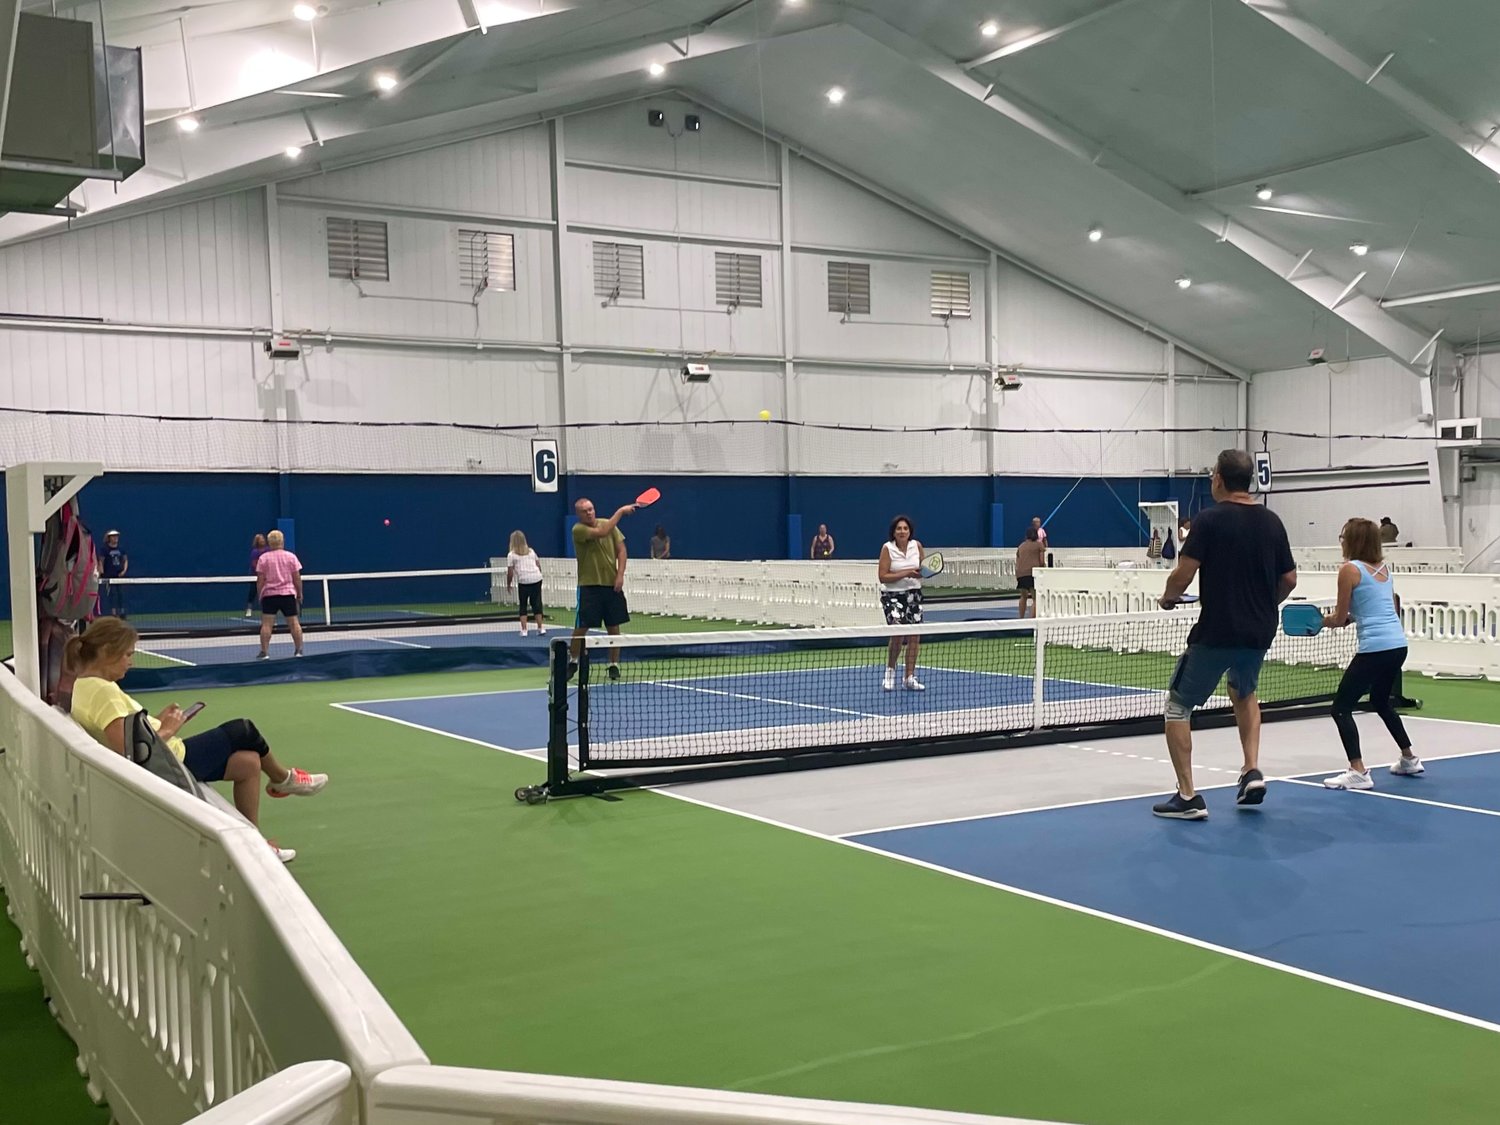 Seniors originally gravitated toward pickleball as it is less taxing than alternatives like tennis and lends itself to socializing.